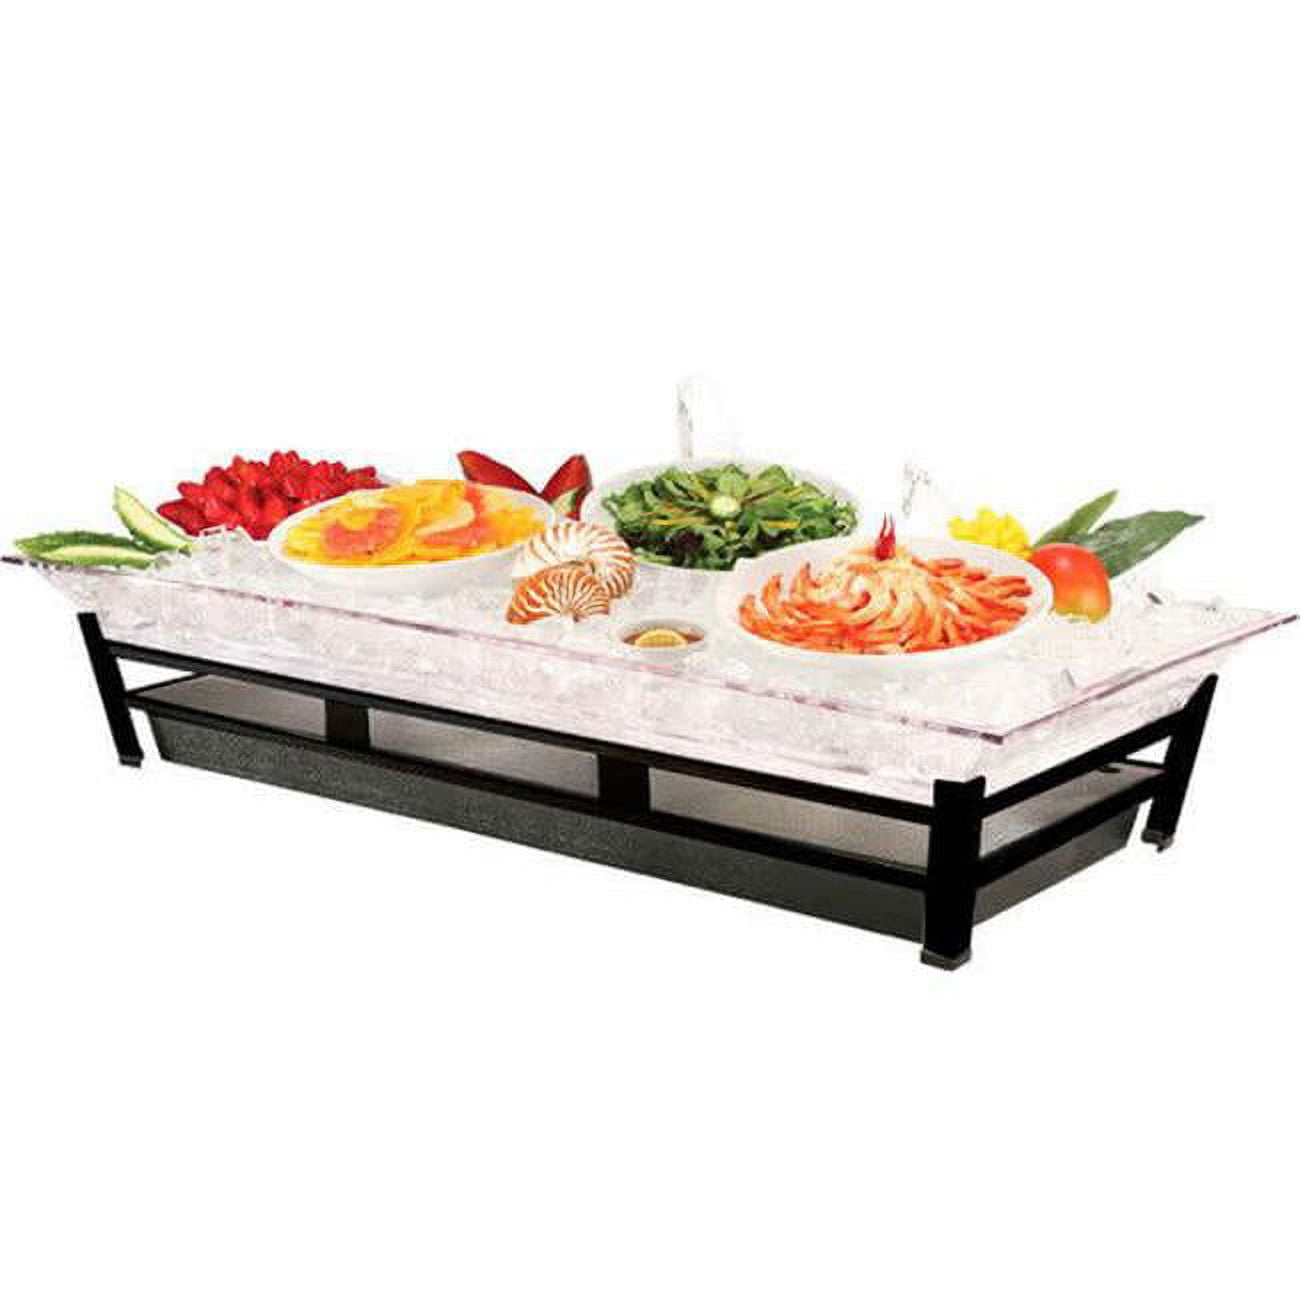 Cal Mil IP2020-13 24 x 48 in. Large Black Ultimate Ice Housing Display with LED